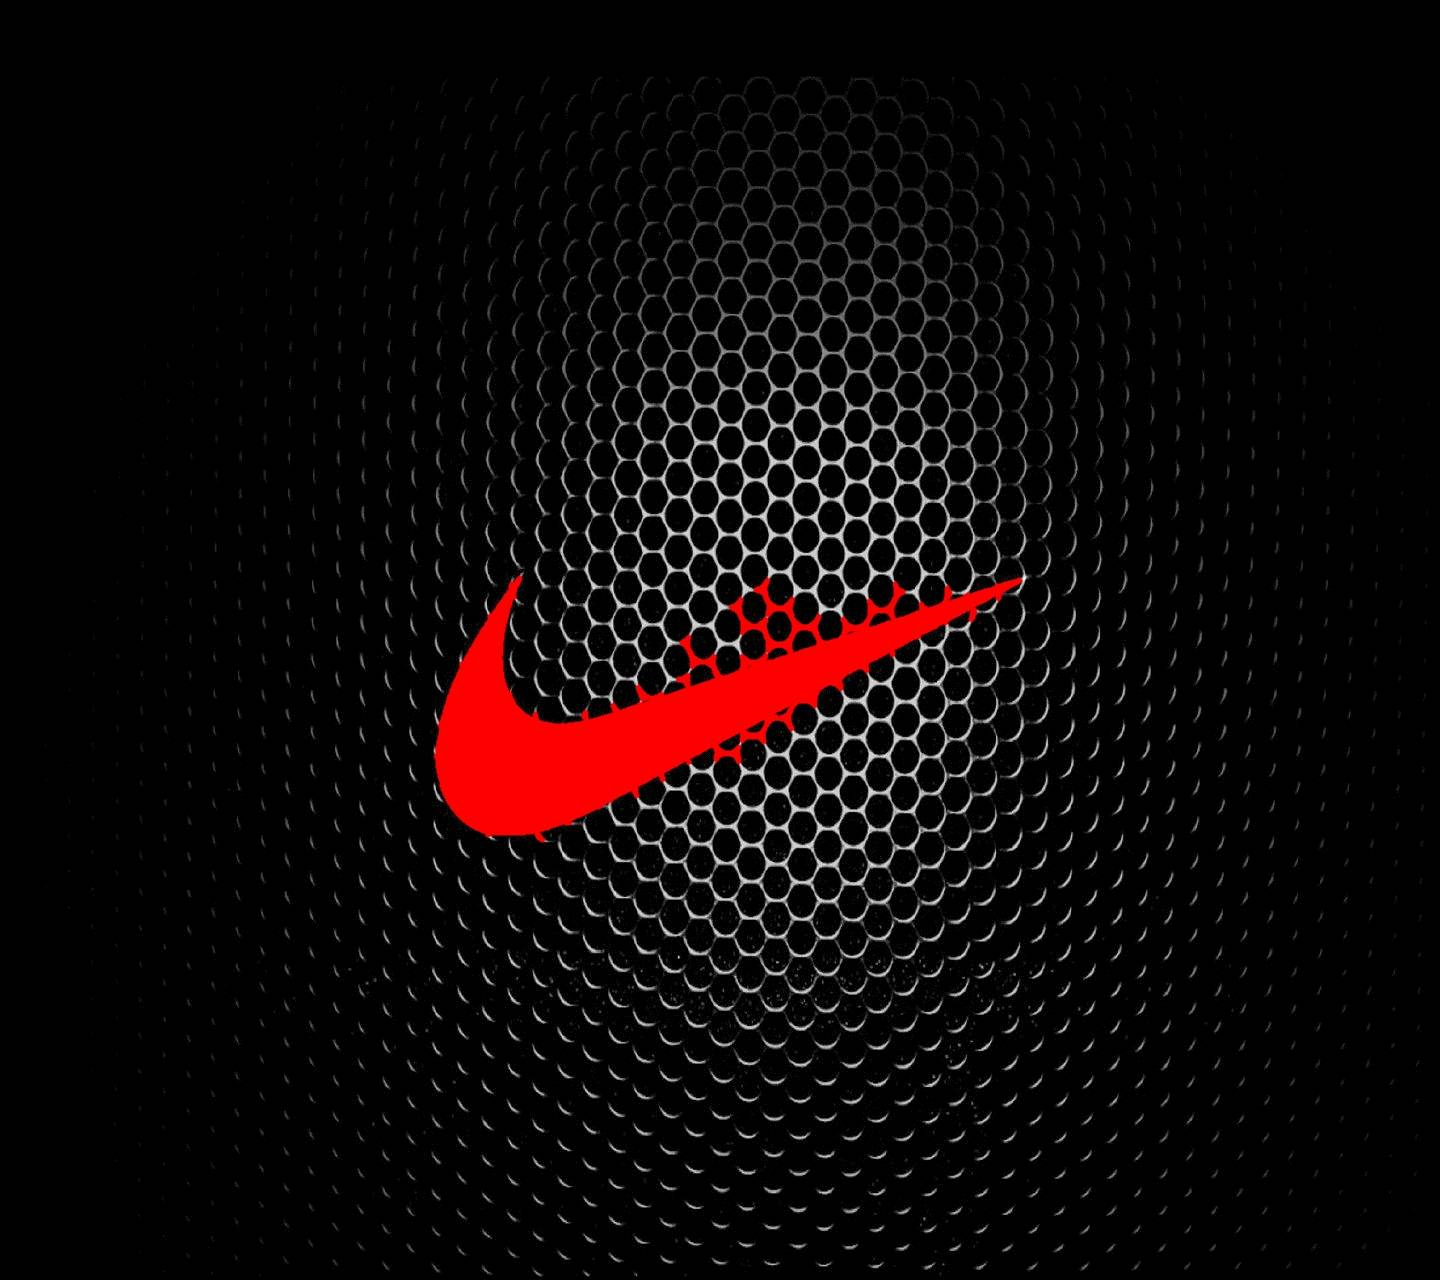 Nike Wallpaper for All the Fans of the Famous Brand